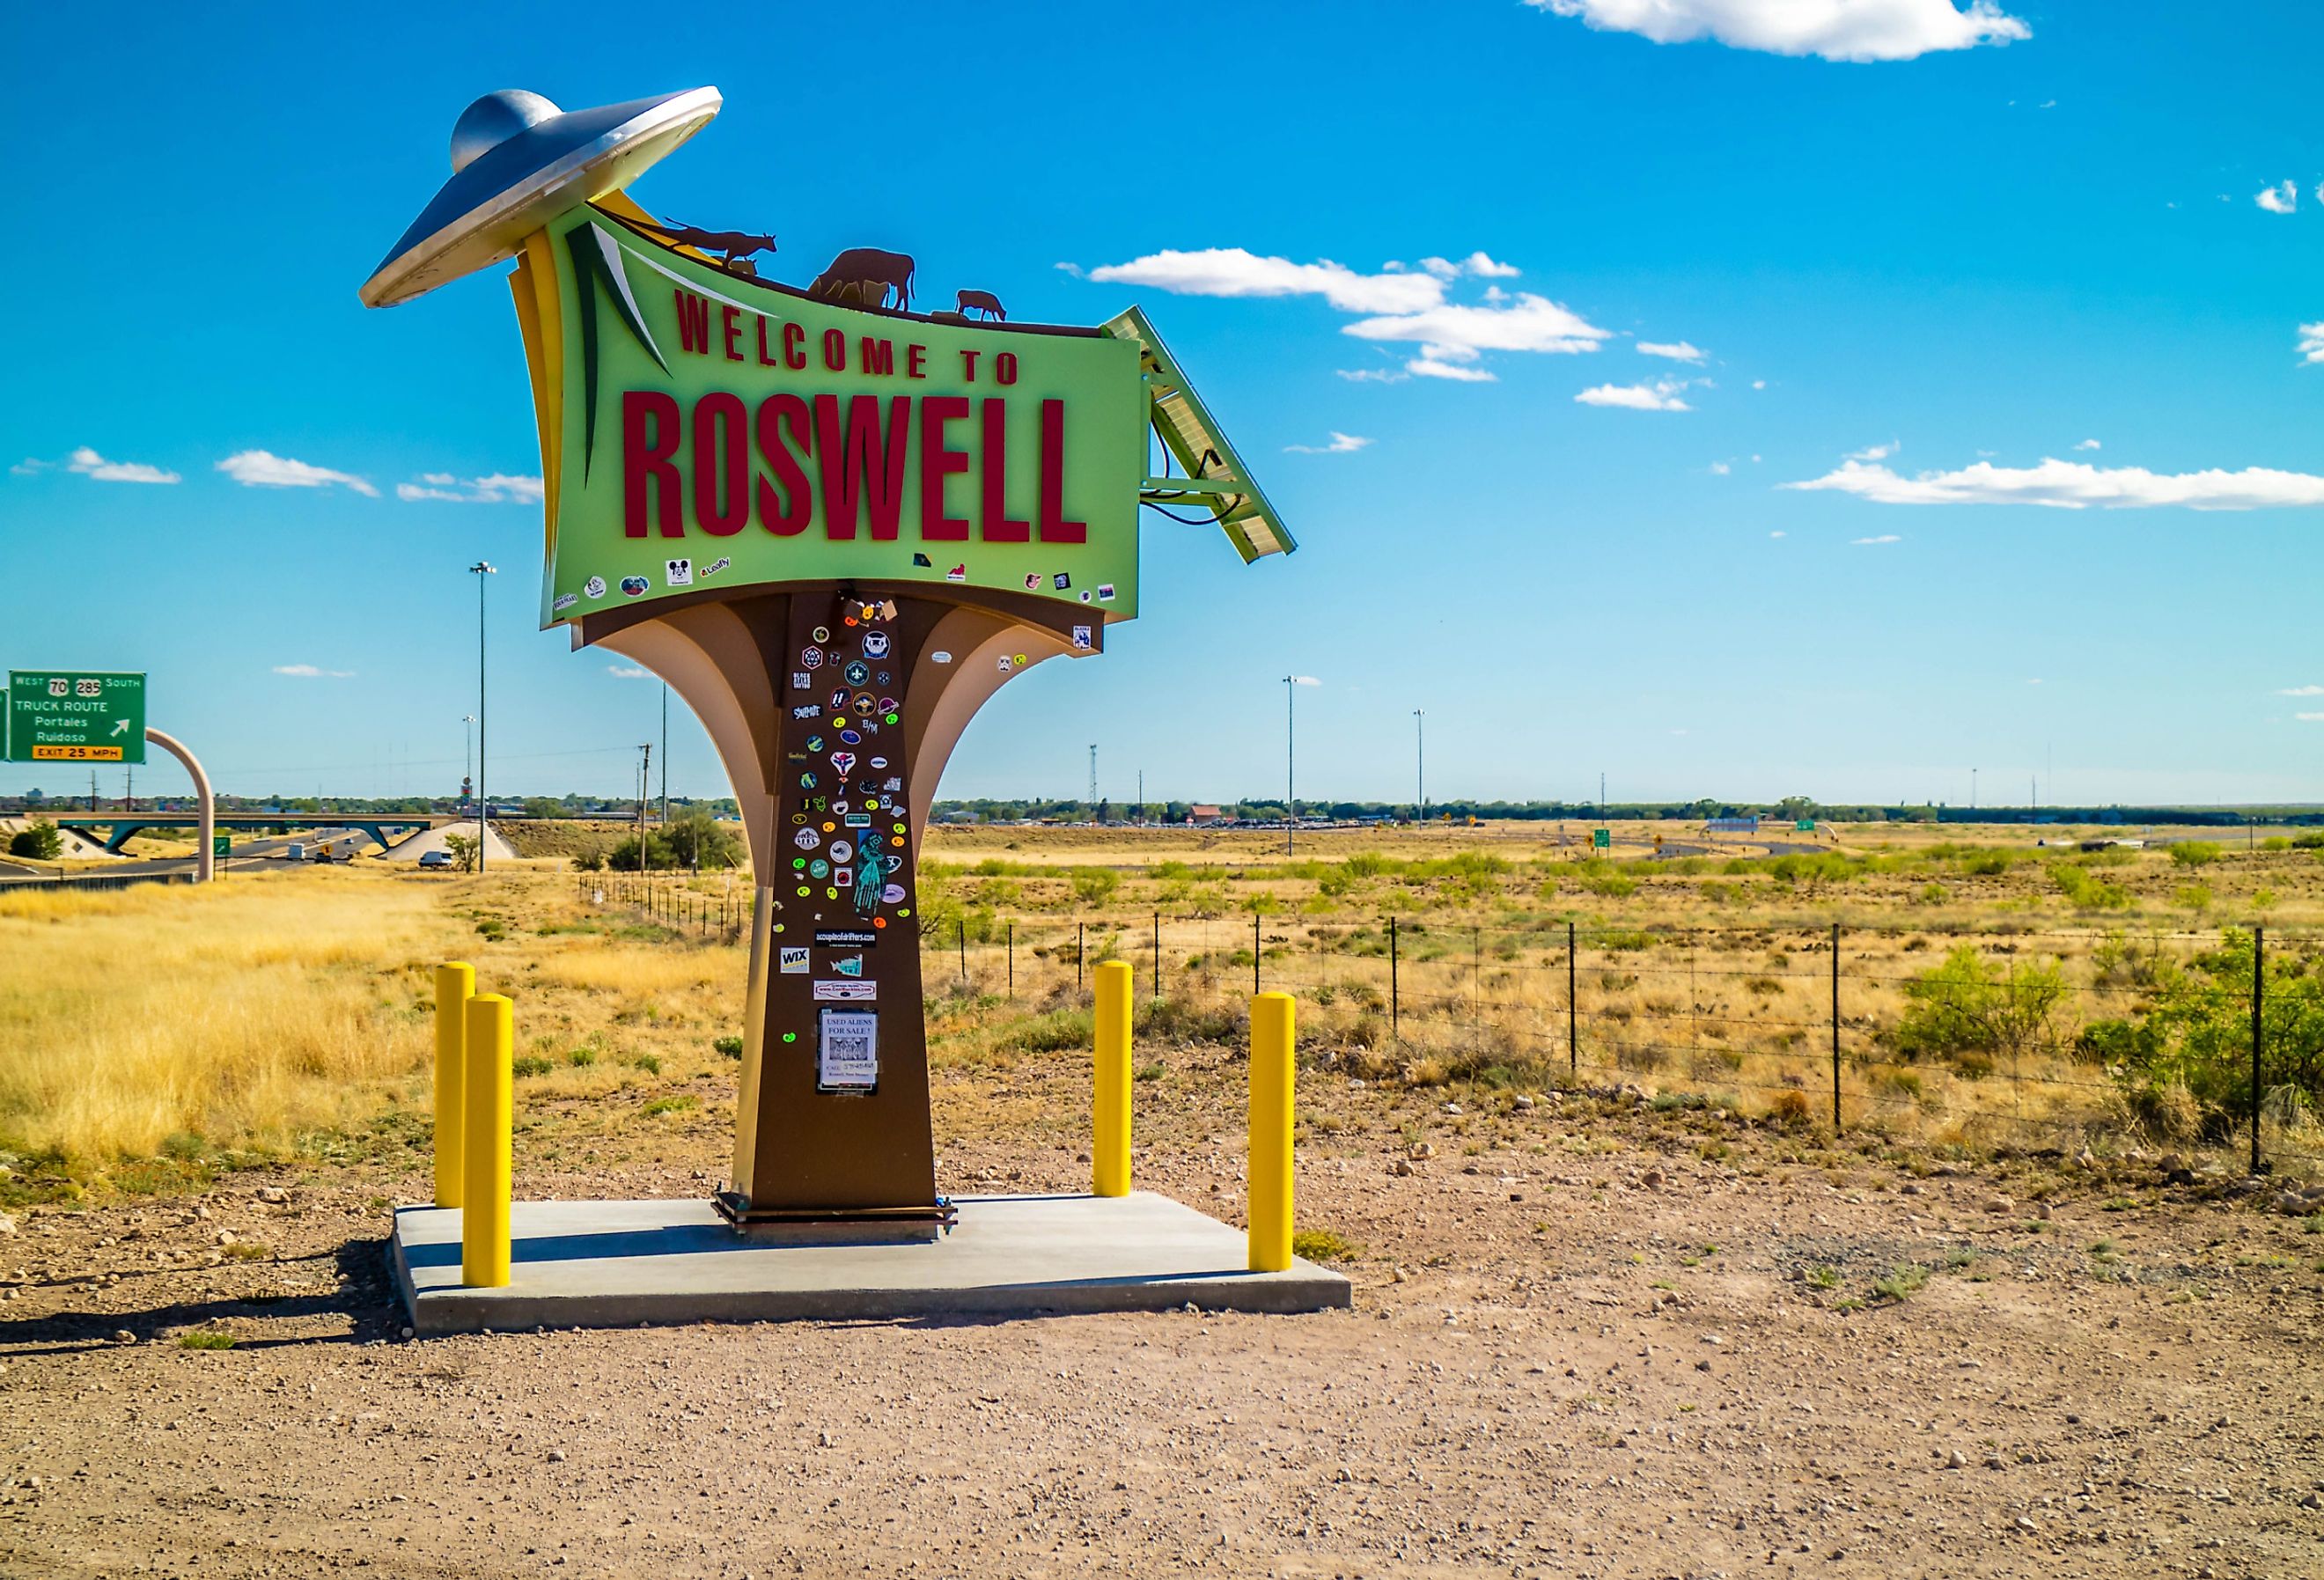  A welcoming signboard at the entry point of Roswell, New Mexico. Image credit Cheri Alguire via Shutterstock